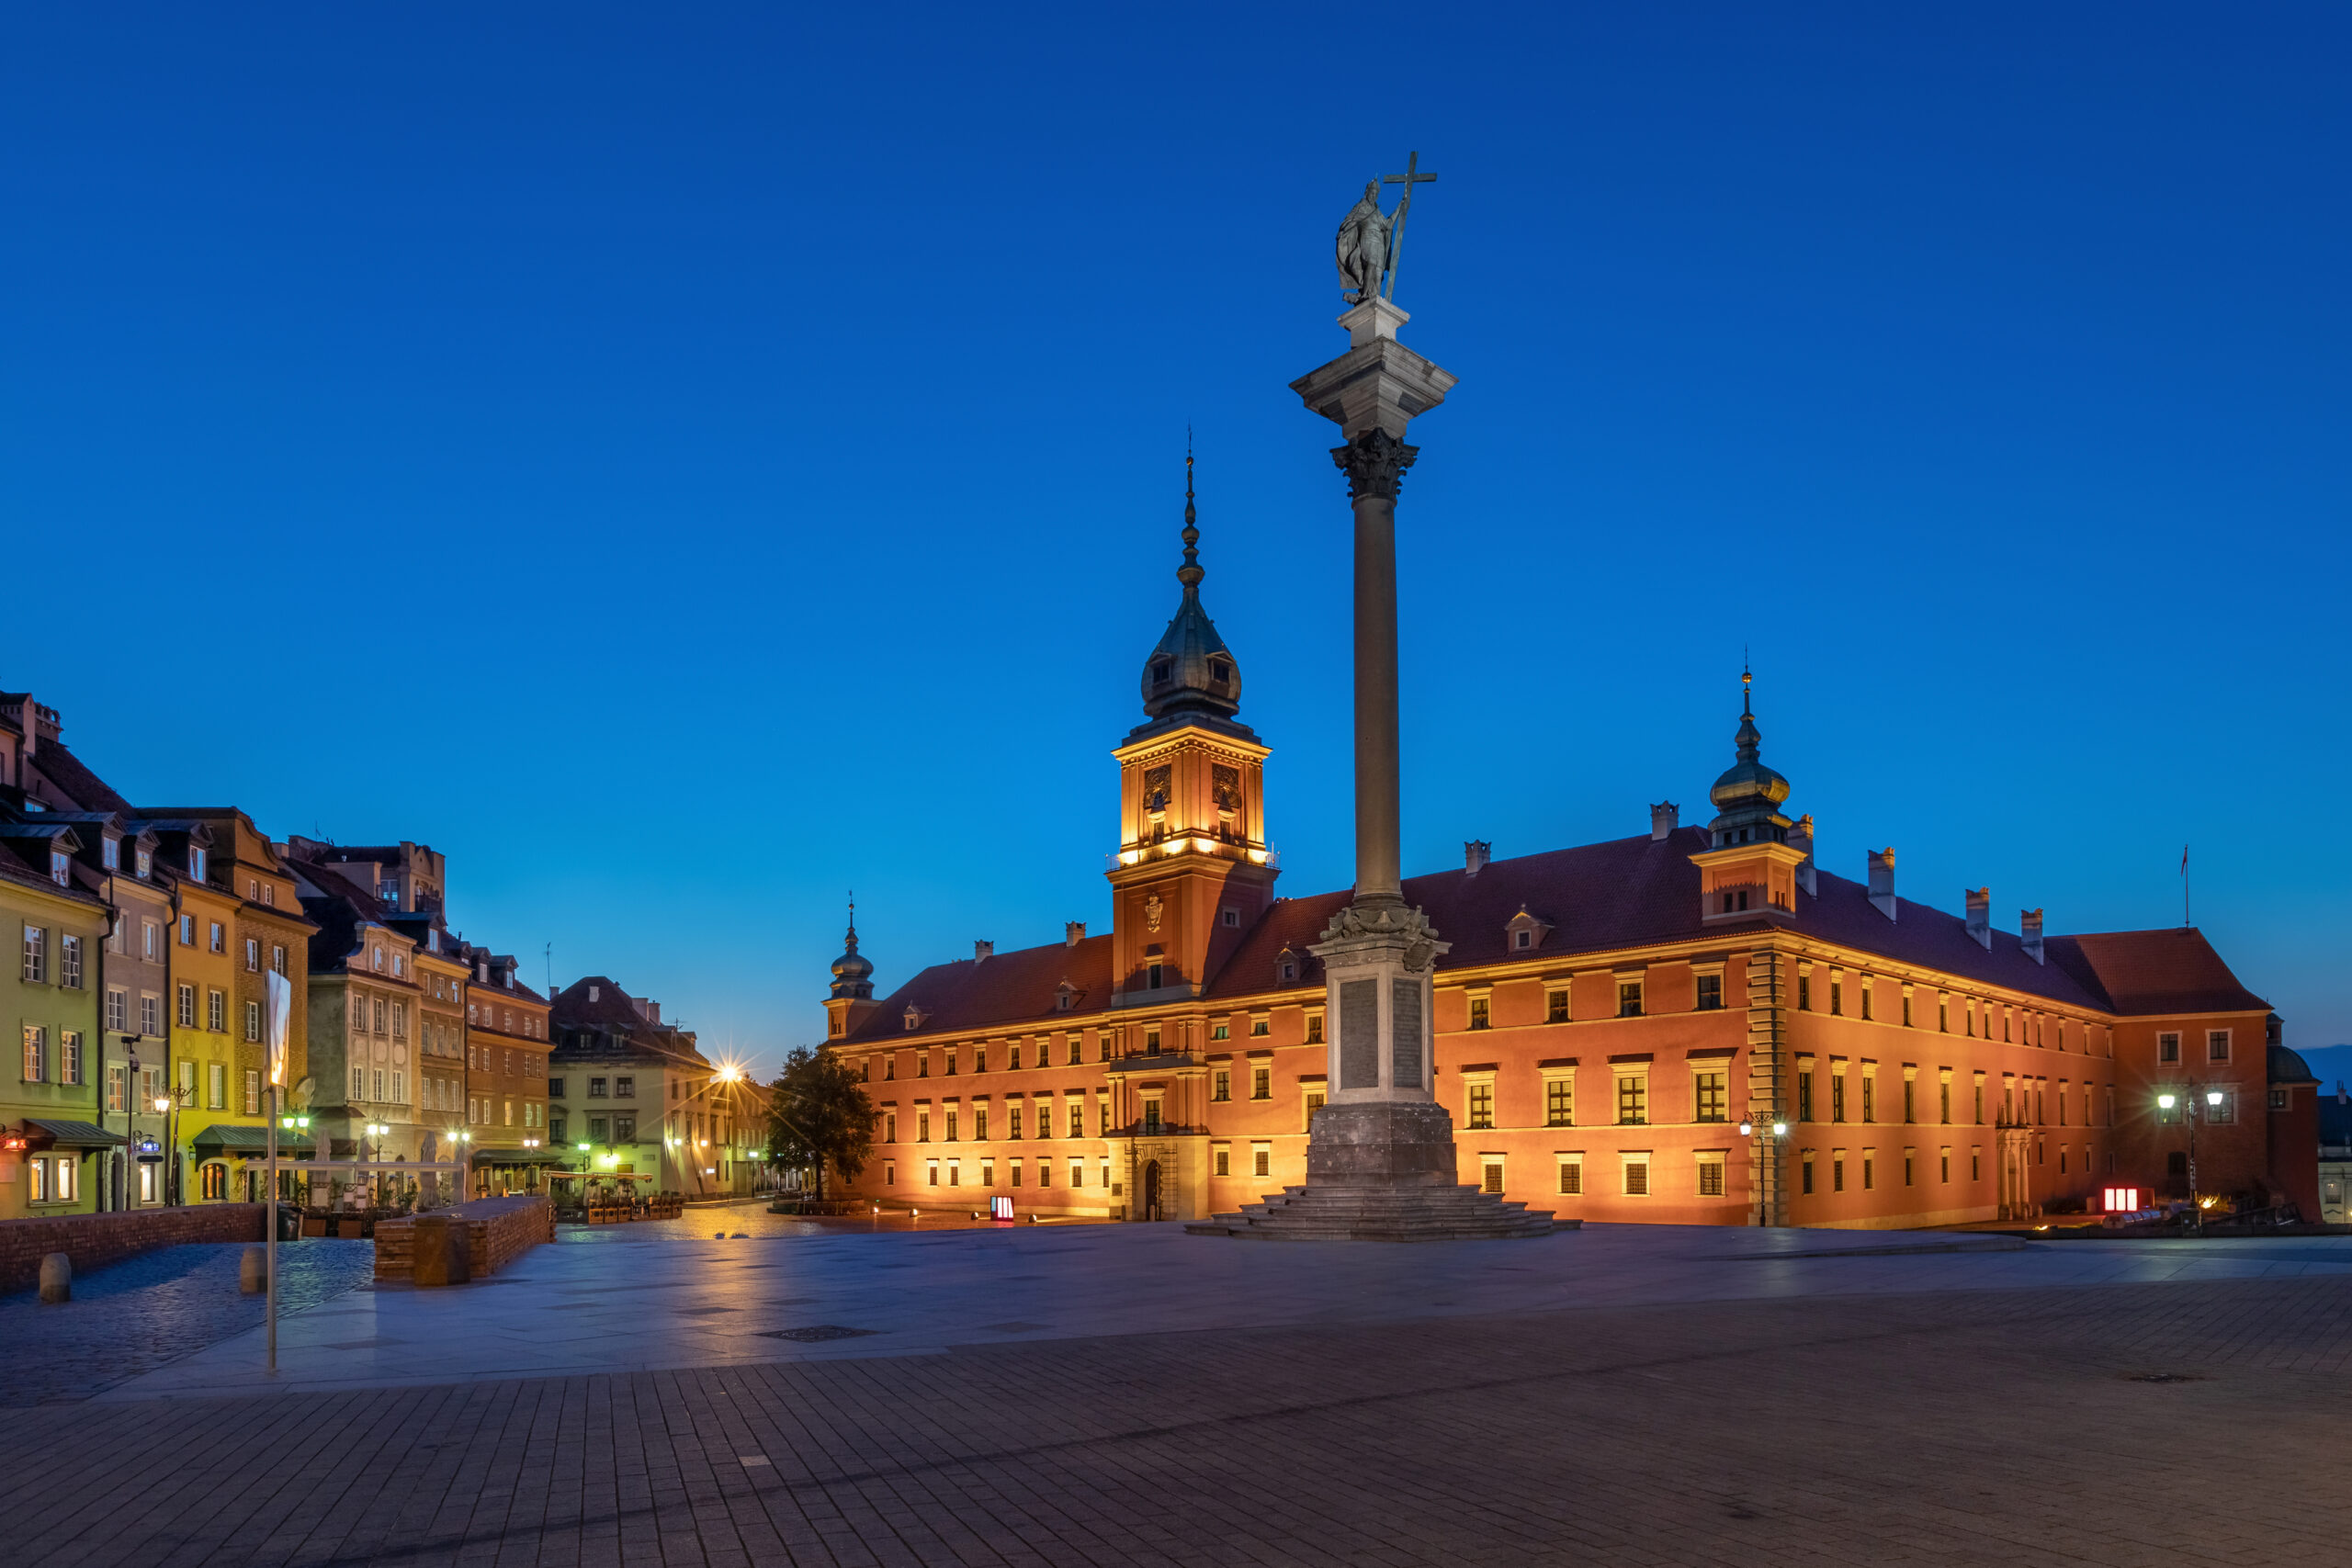 Warsaw, Poland. Square in front of The Royal Castle at dusk